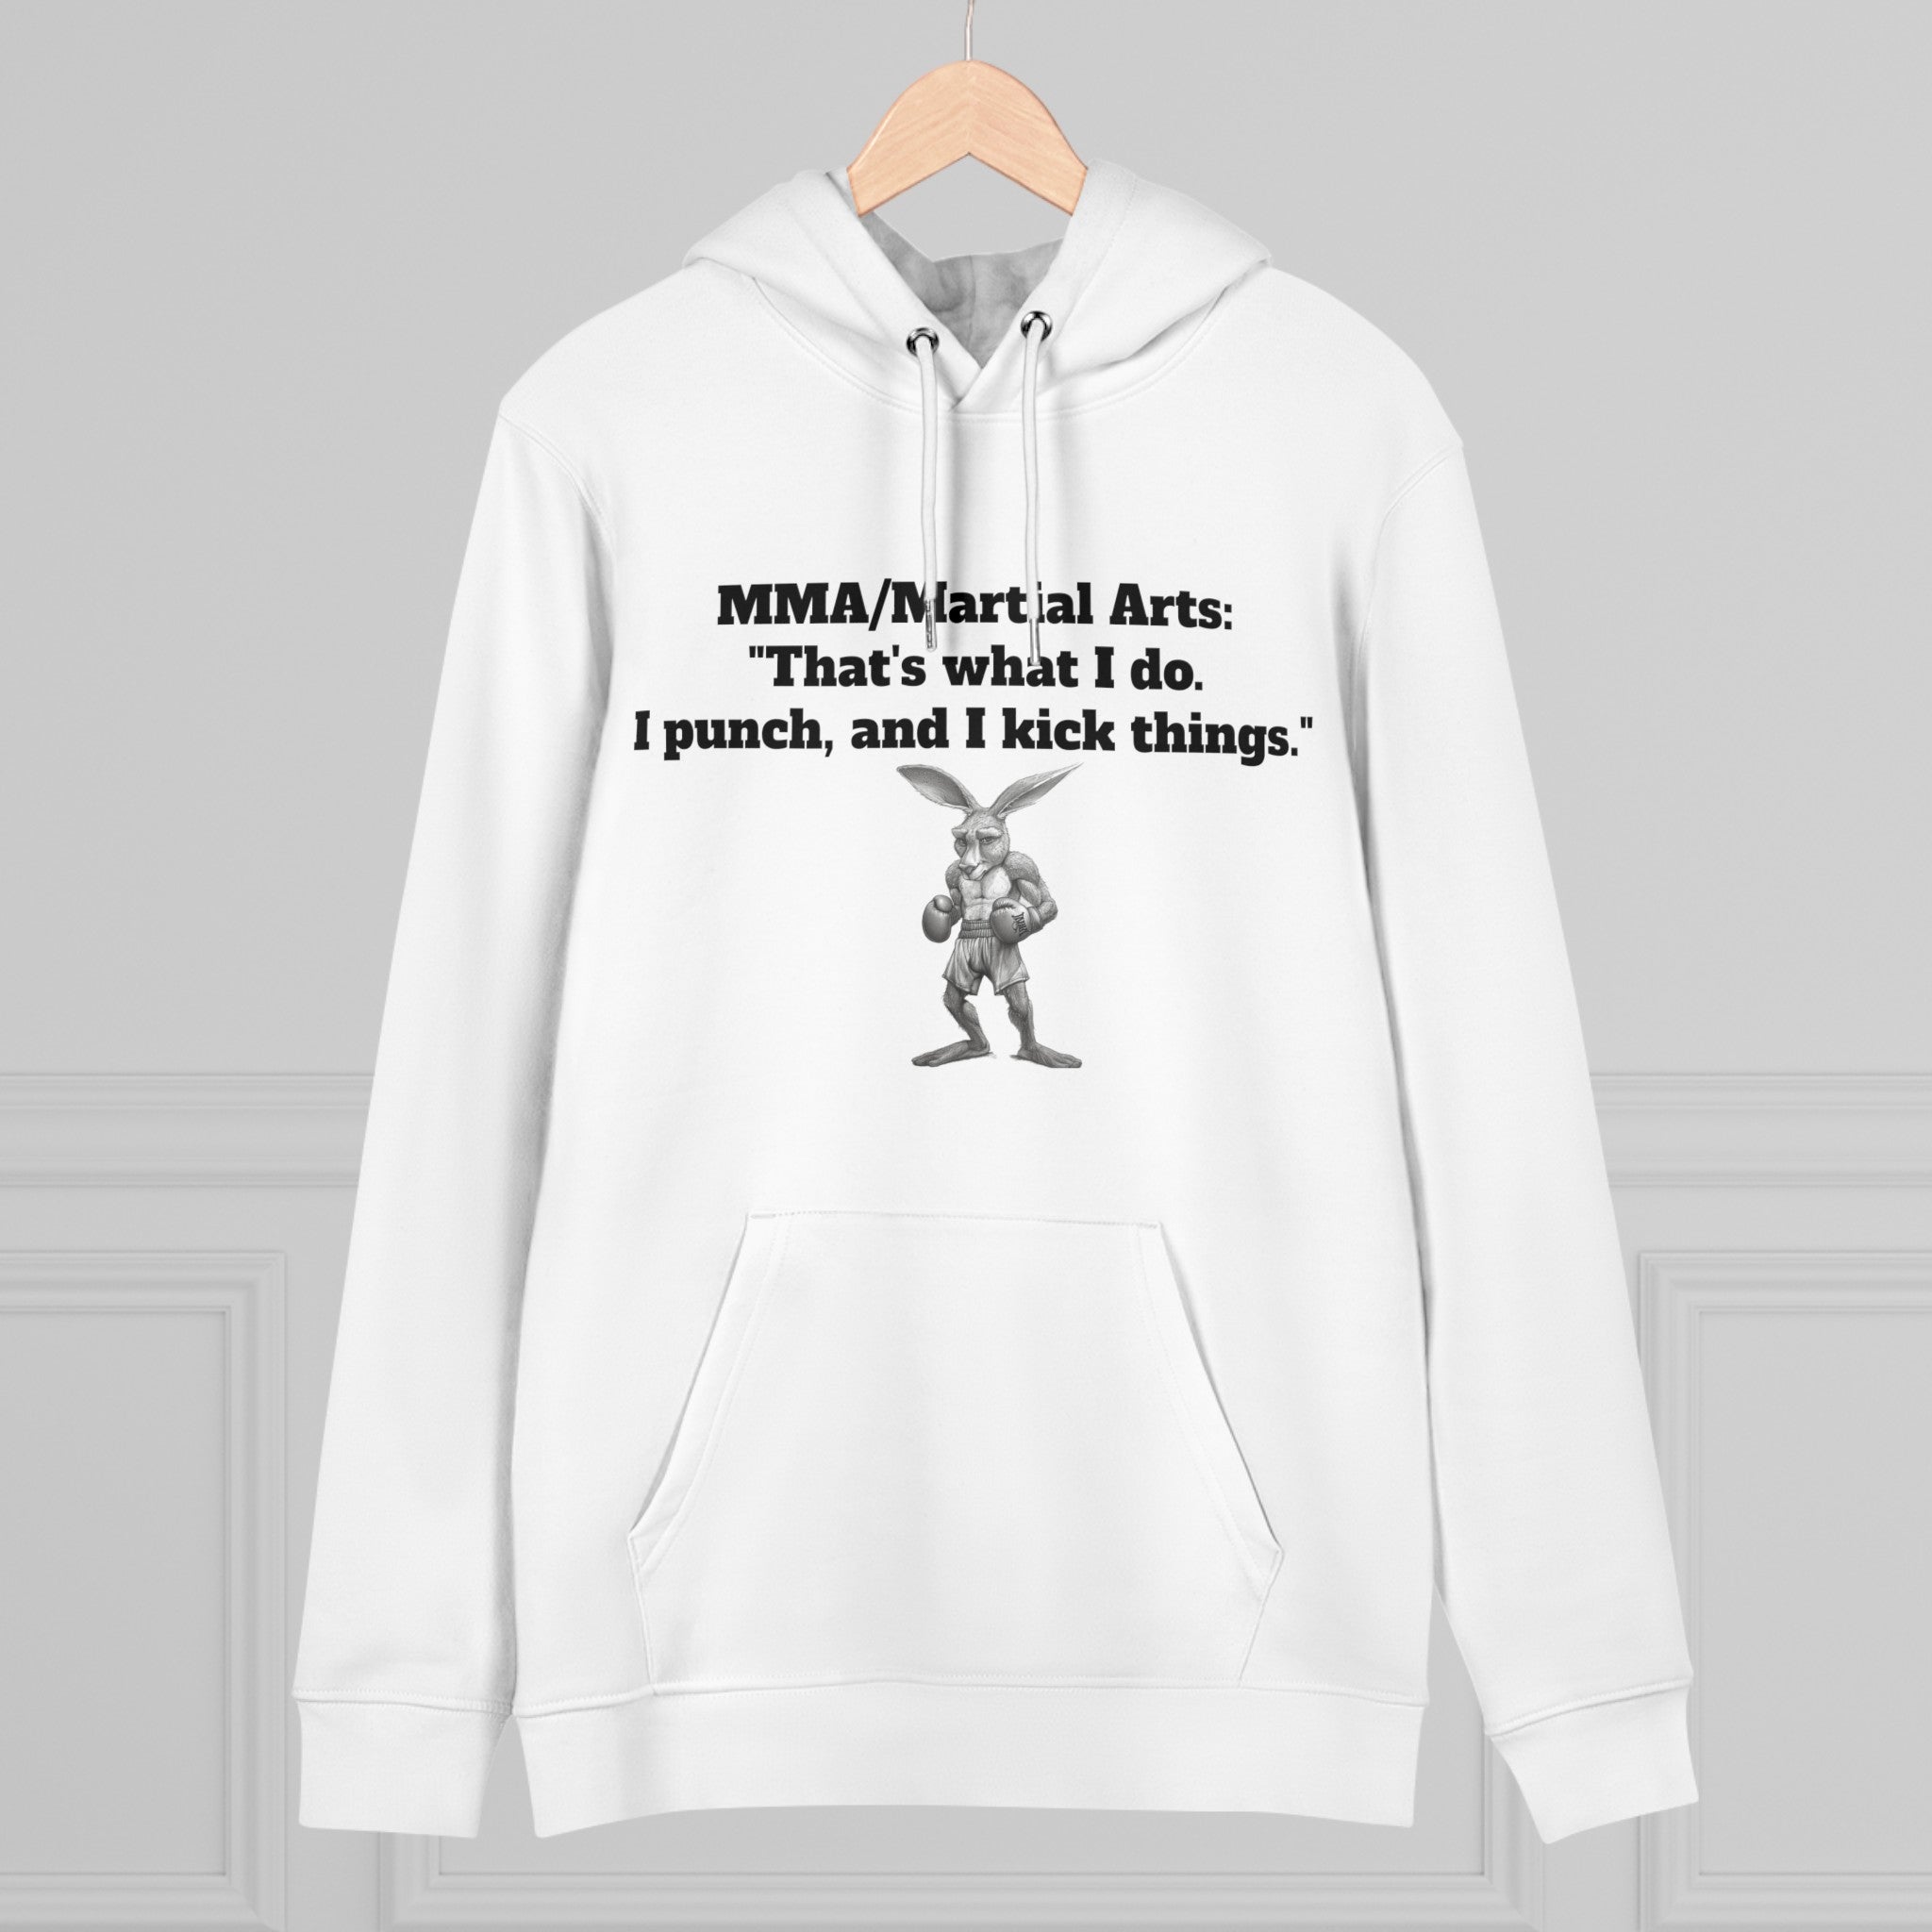 Fighter’s Creed: 'That's What I Do. I Punch, and I Kick Things.' Kangaroo Boxer Pose Unisex Cruiser Hoodie